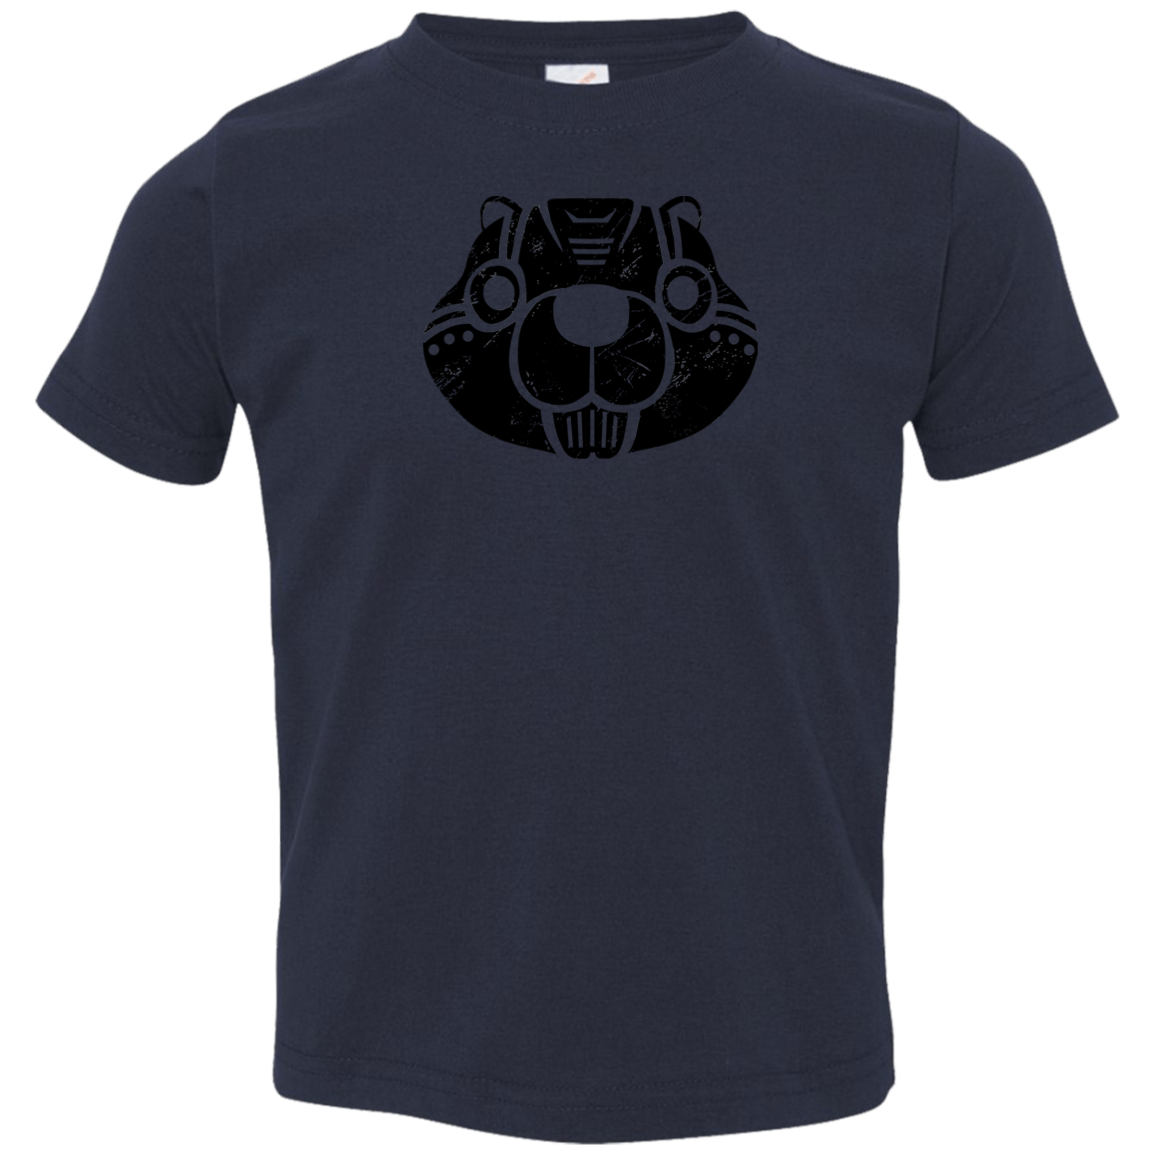 Black Distressed Emblem T-Shirts for Toddlers (Beaver/Buzzcut) - Dark Corps